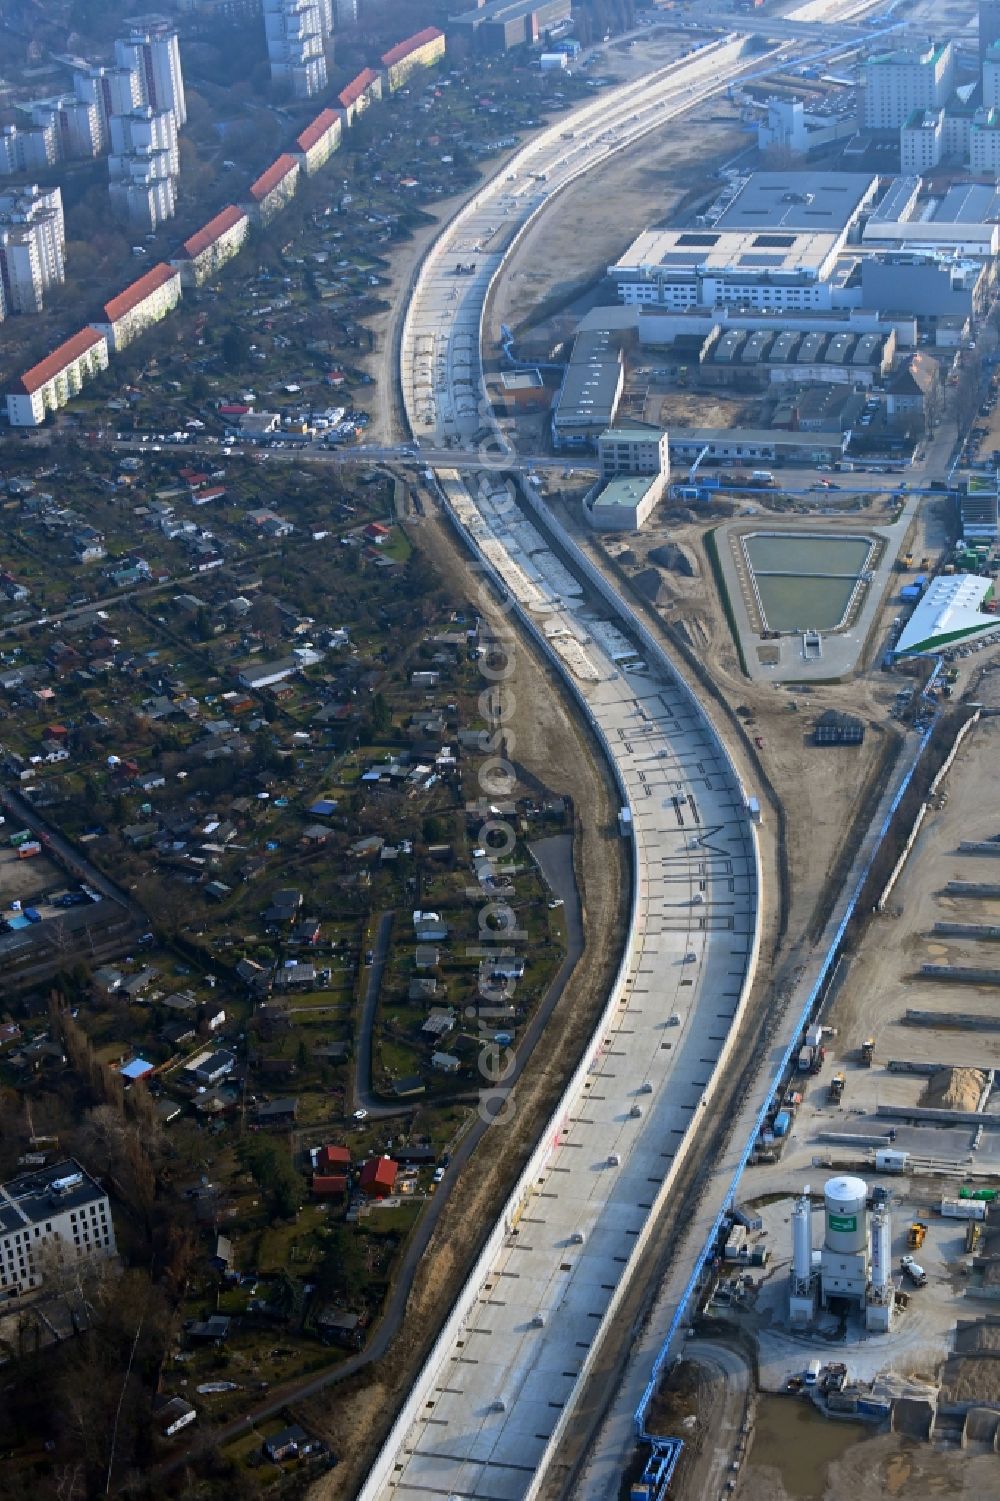 Aerial image Berlin - Civil engineering construction sites for construction of the extension of the urban motorway - Autobahn Autobahn A100 in Berlin Treptow